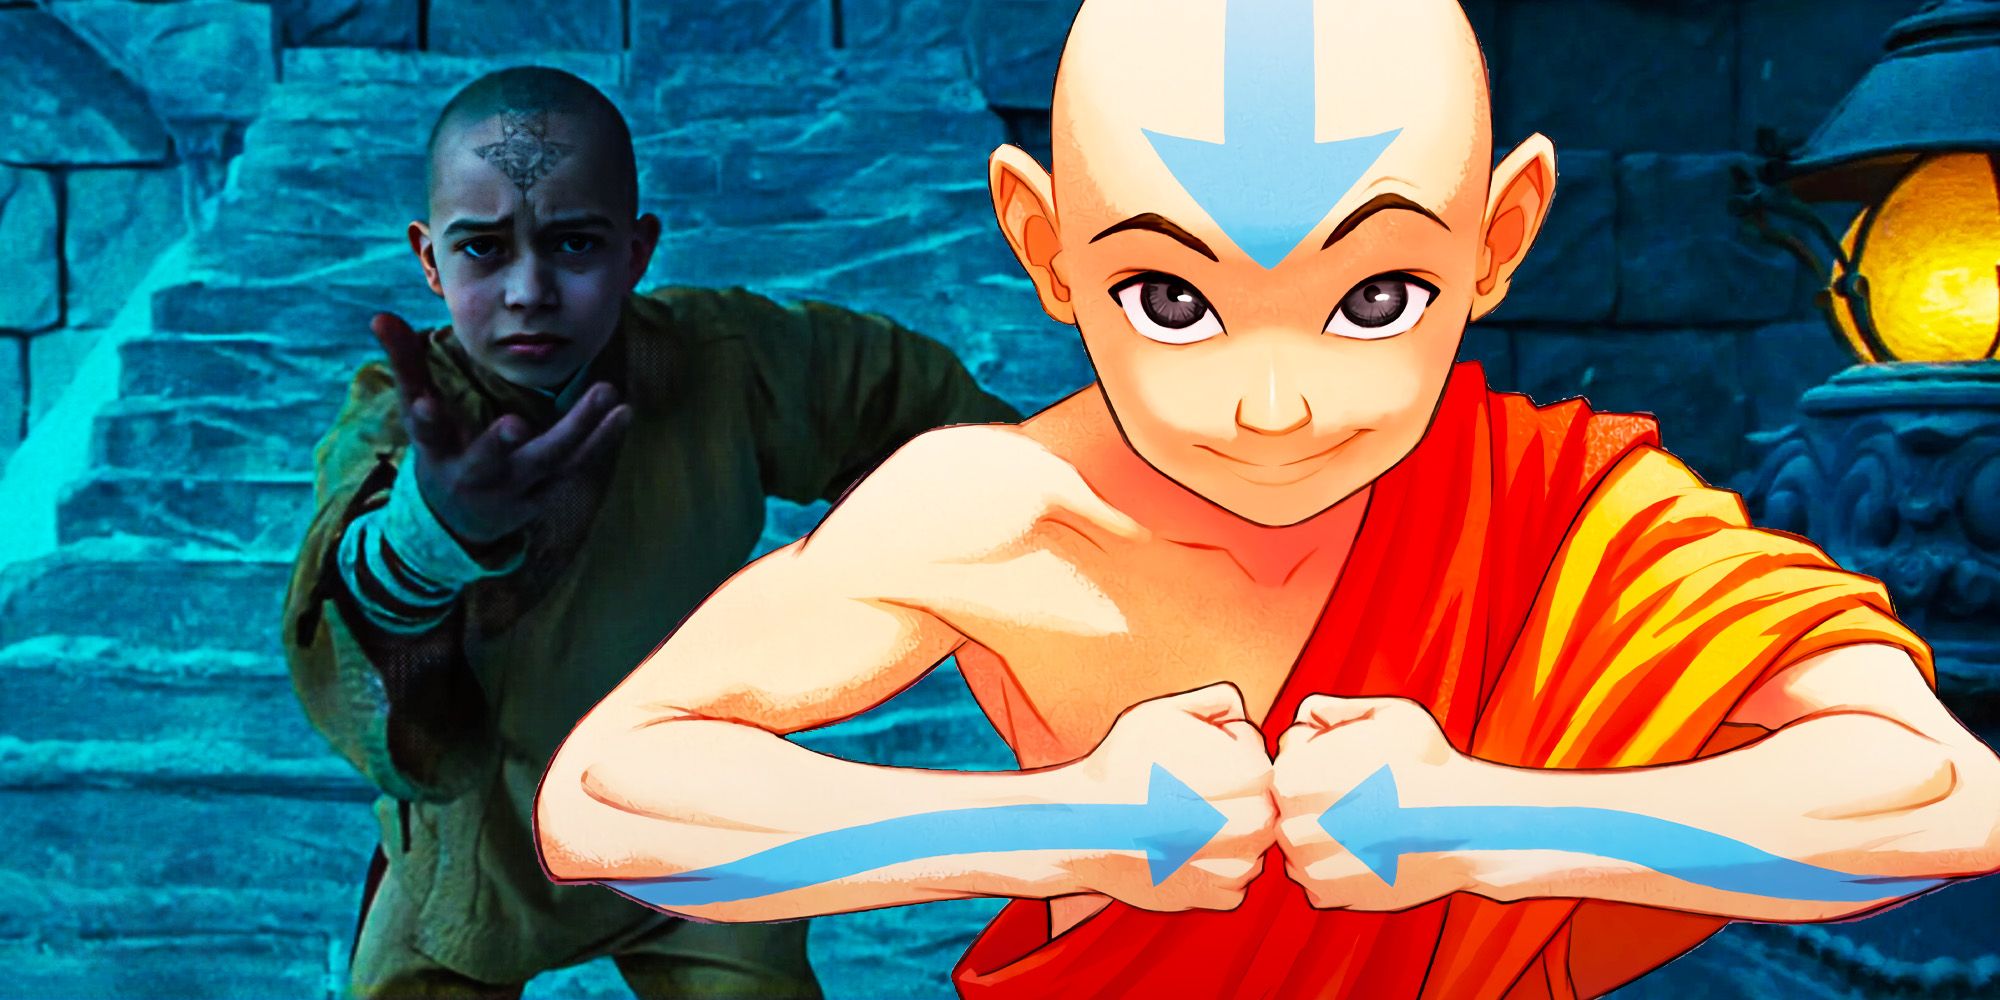 RPubs  An Analysis of Avatar The Last Airbender